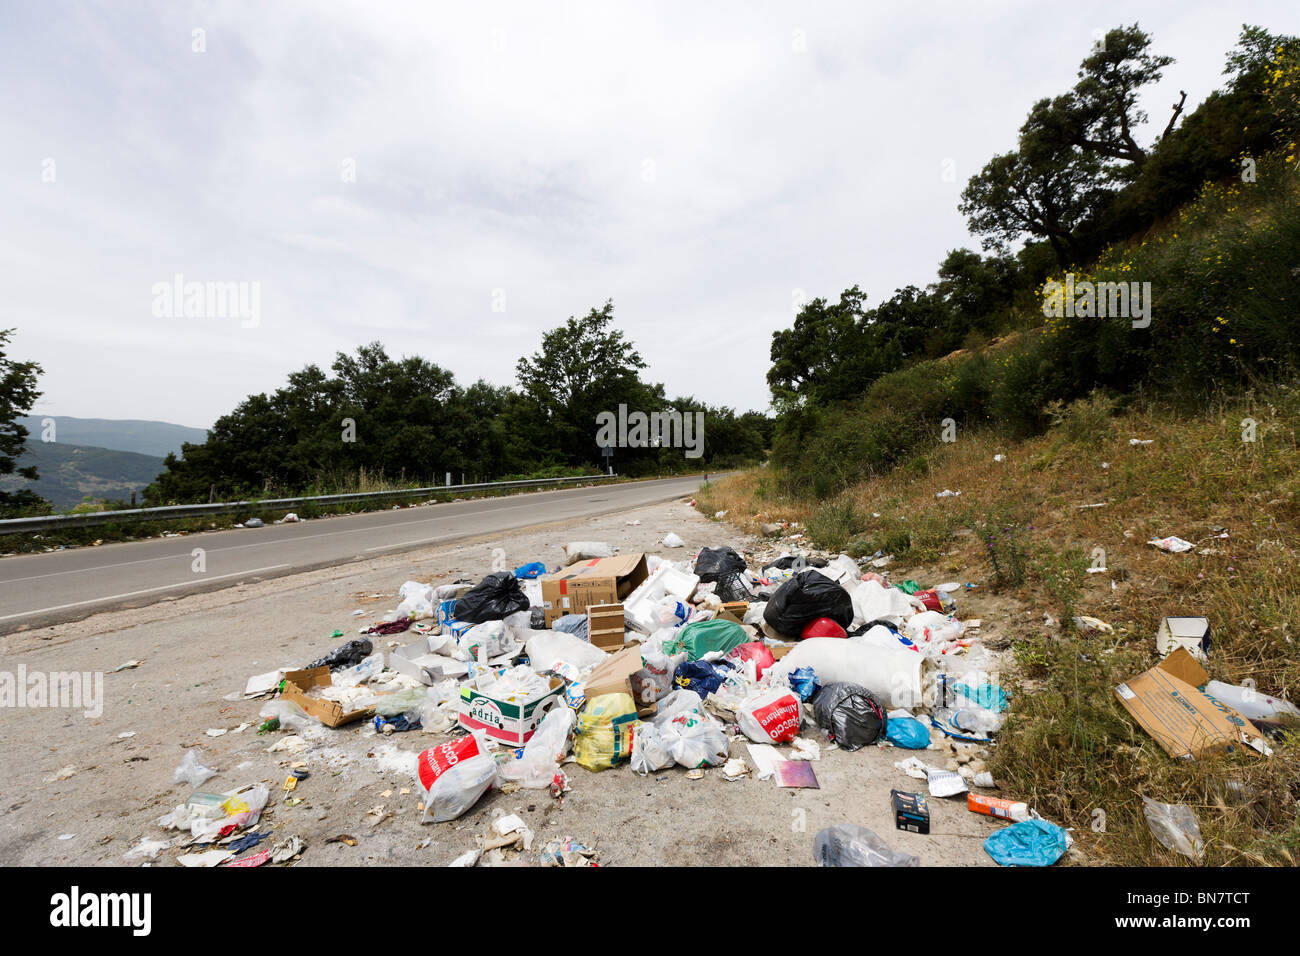 Fly tipping in a layby on the SS 289 in the Parco dei Nebrodi National Park, Sicily, Italy Stock Photo